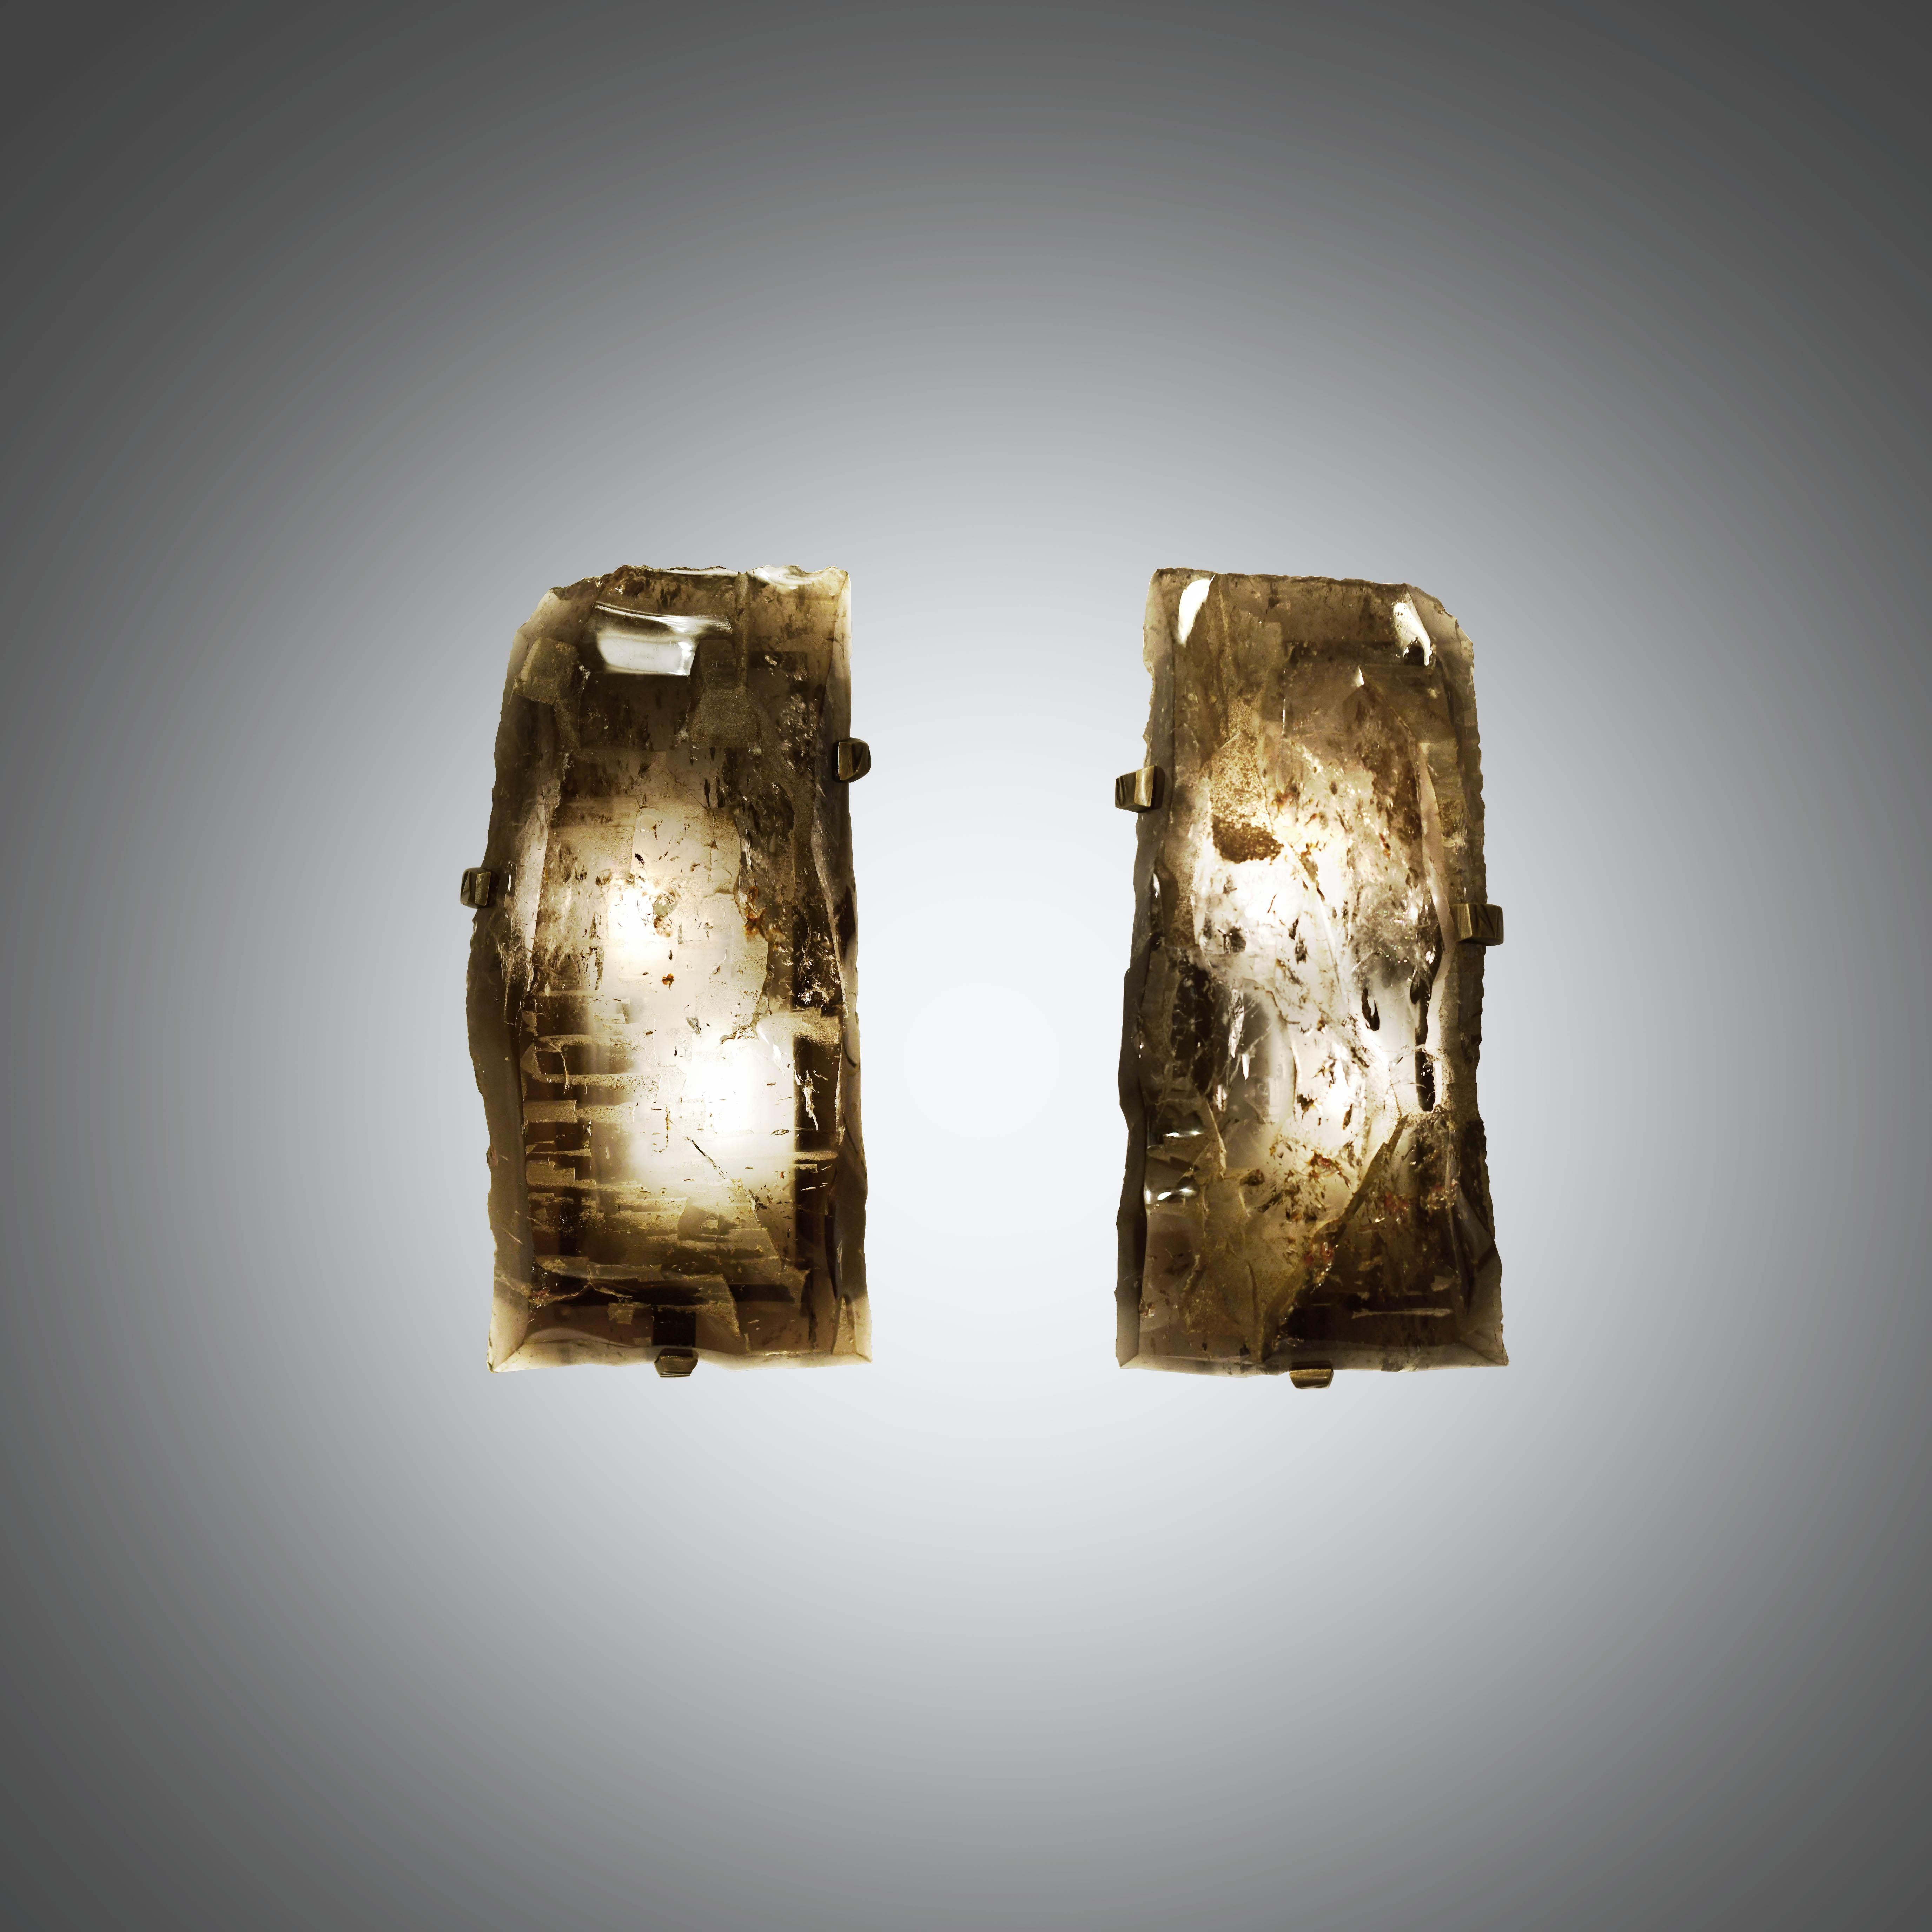 Pair of natural smoky rock crystal quartz wall sconces with antique brass-mounted, selected from natural rock crystal with the beautiful natural surface. Created by Phoenix gallery. Custom measurement and finish available. Each wall sconce is